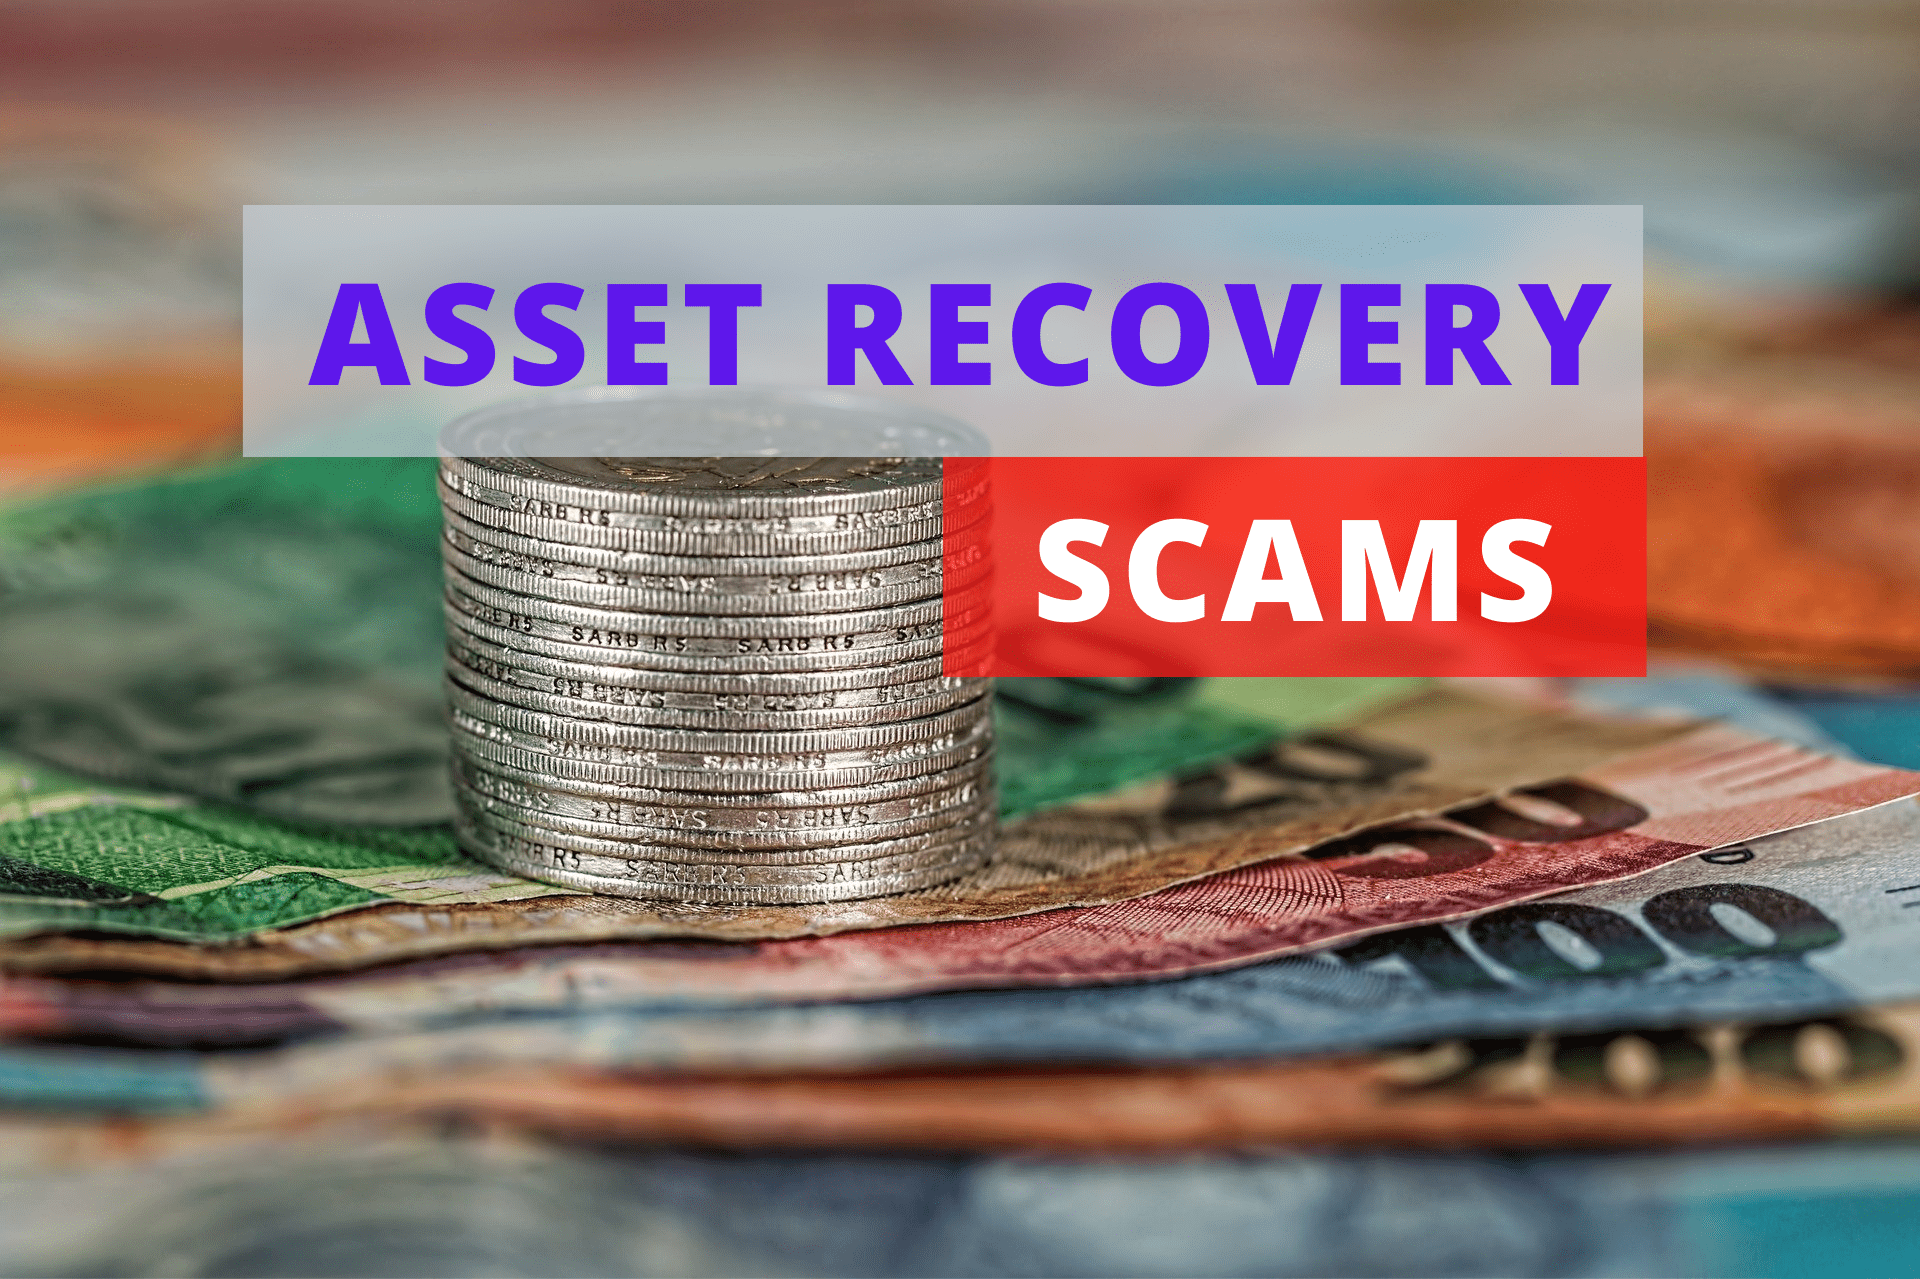 Asset Recovery Scams: A Refund-guide.com Review